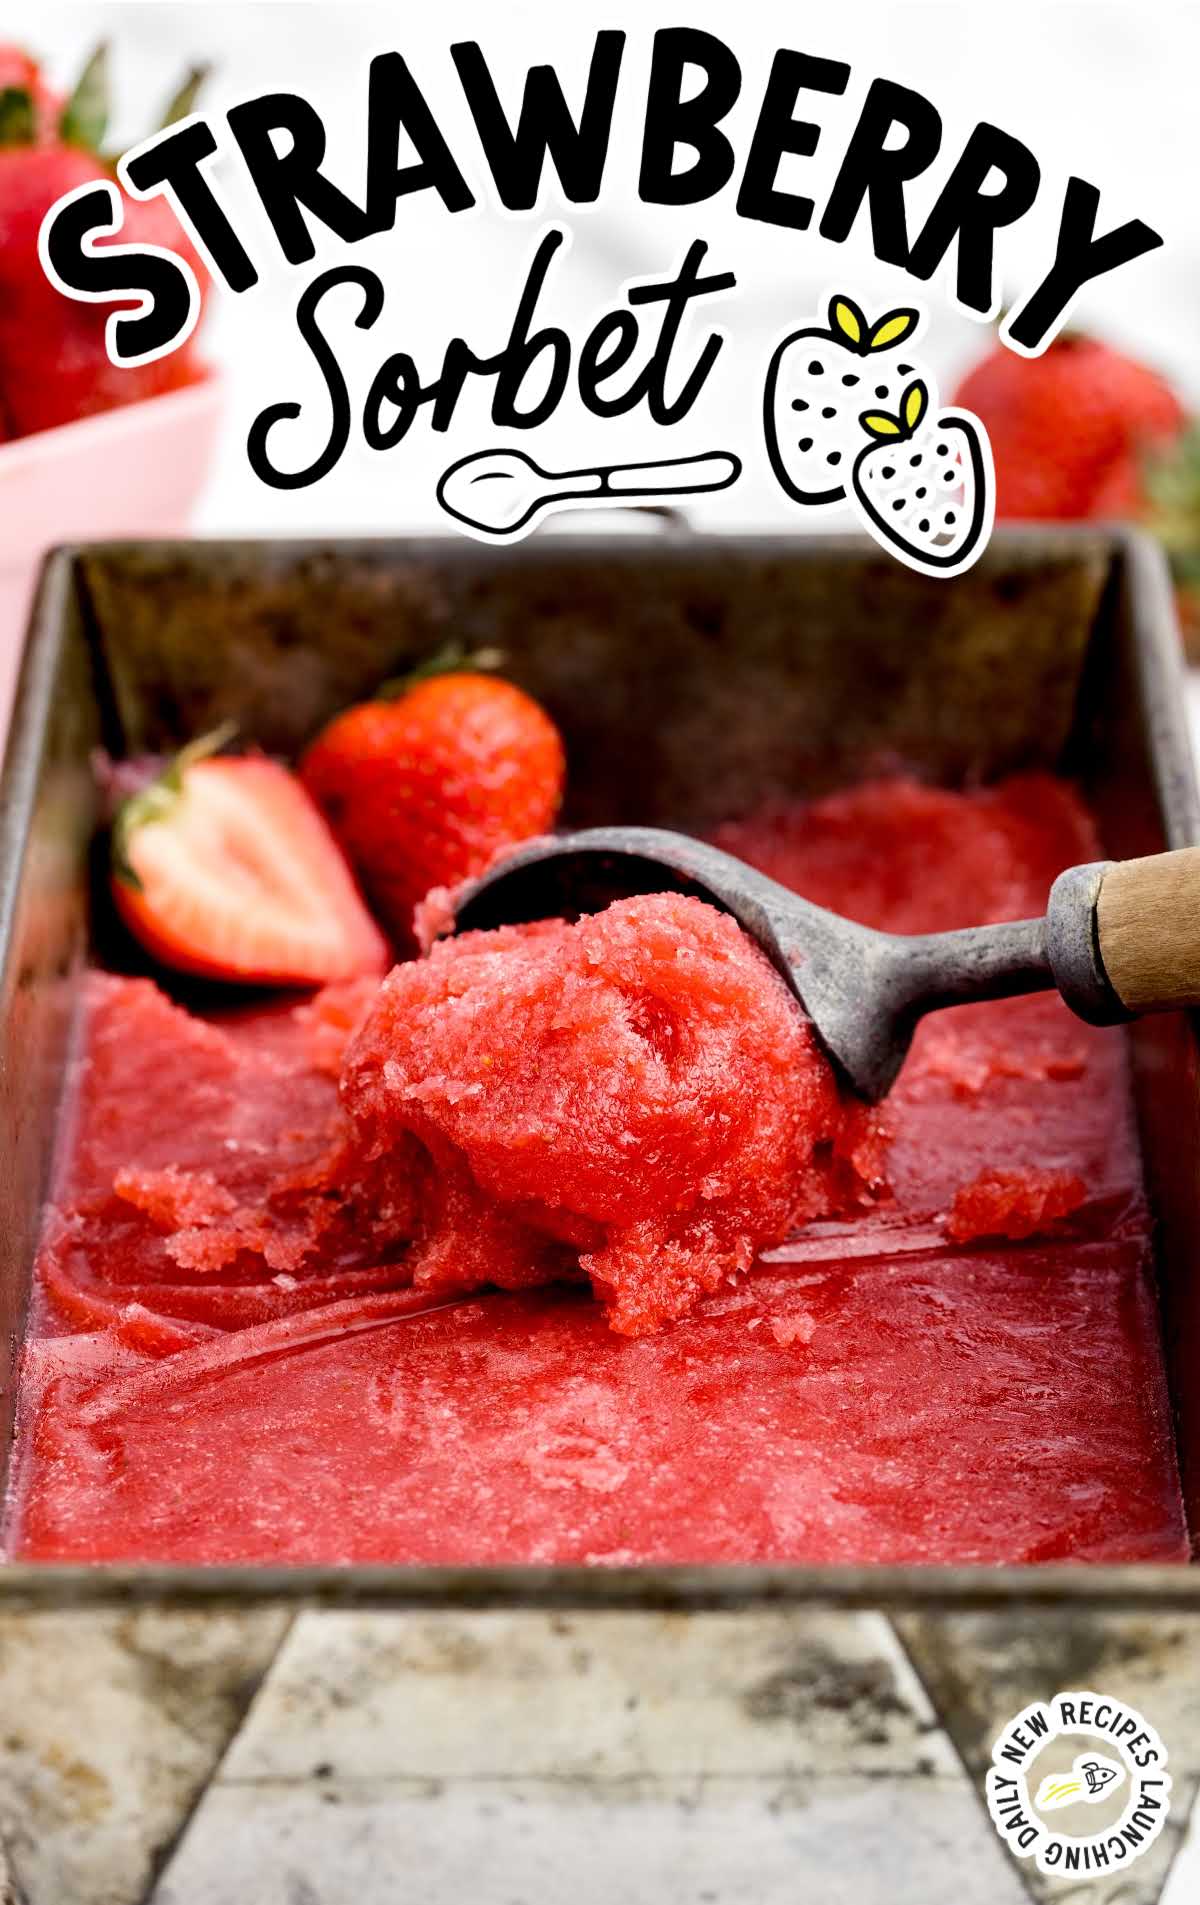 Strawberry Sorbet being scooped out of a pan with an ice cream scooper